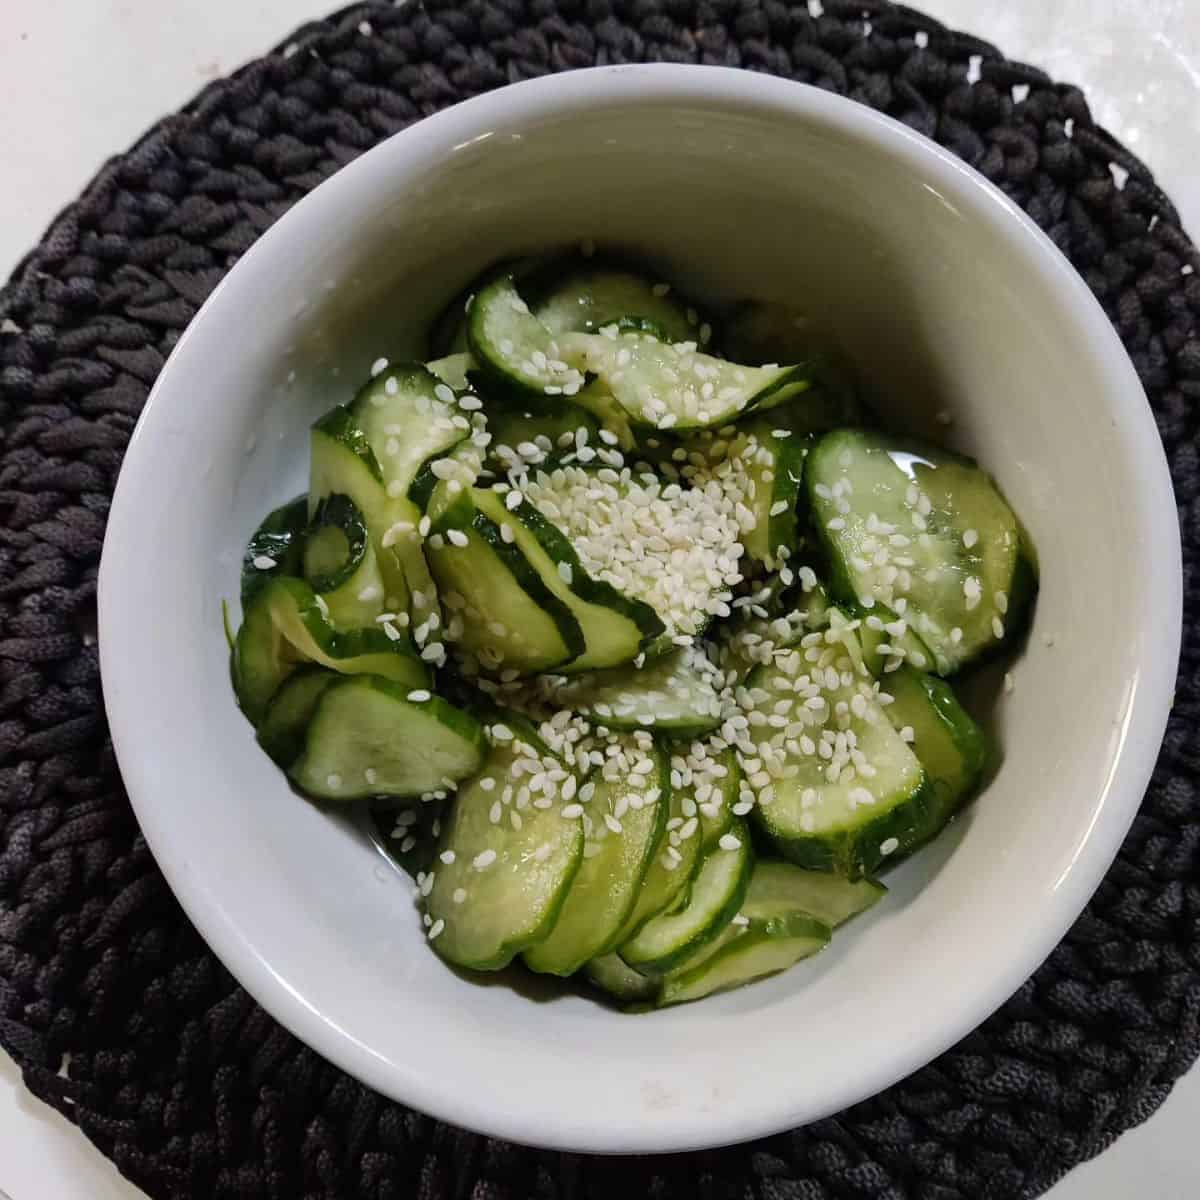 One delicious serving of Japanese cucumber salad with sesame seeds